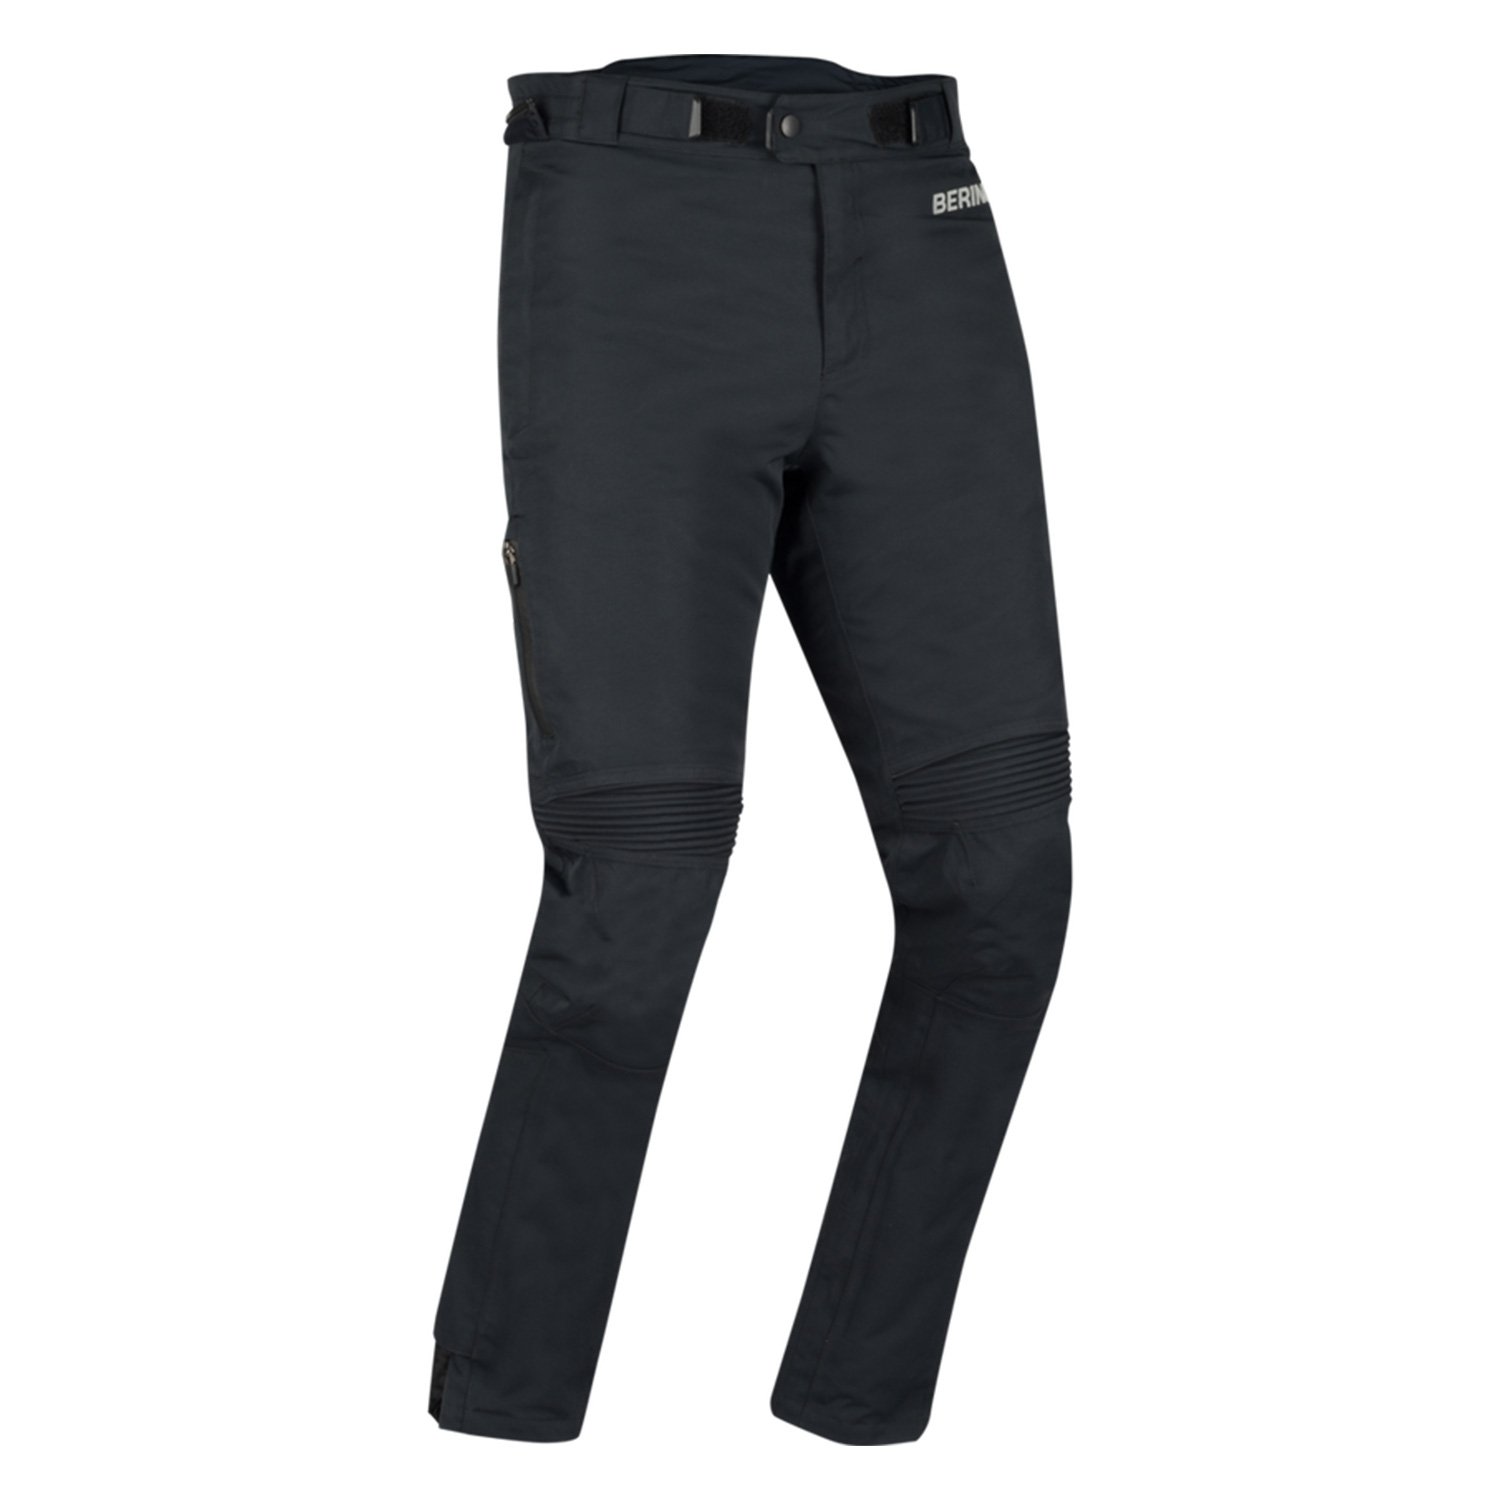 Image of Bering Zephyr Trousers Black Size 3XL ID 3660815180778